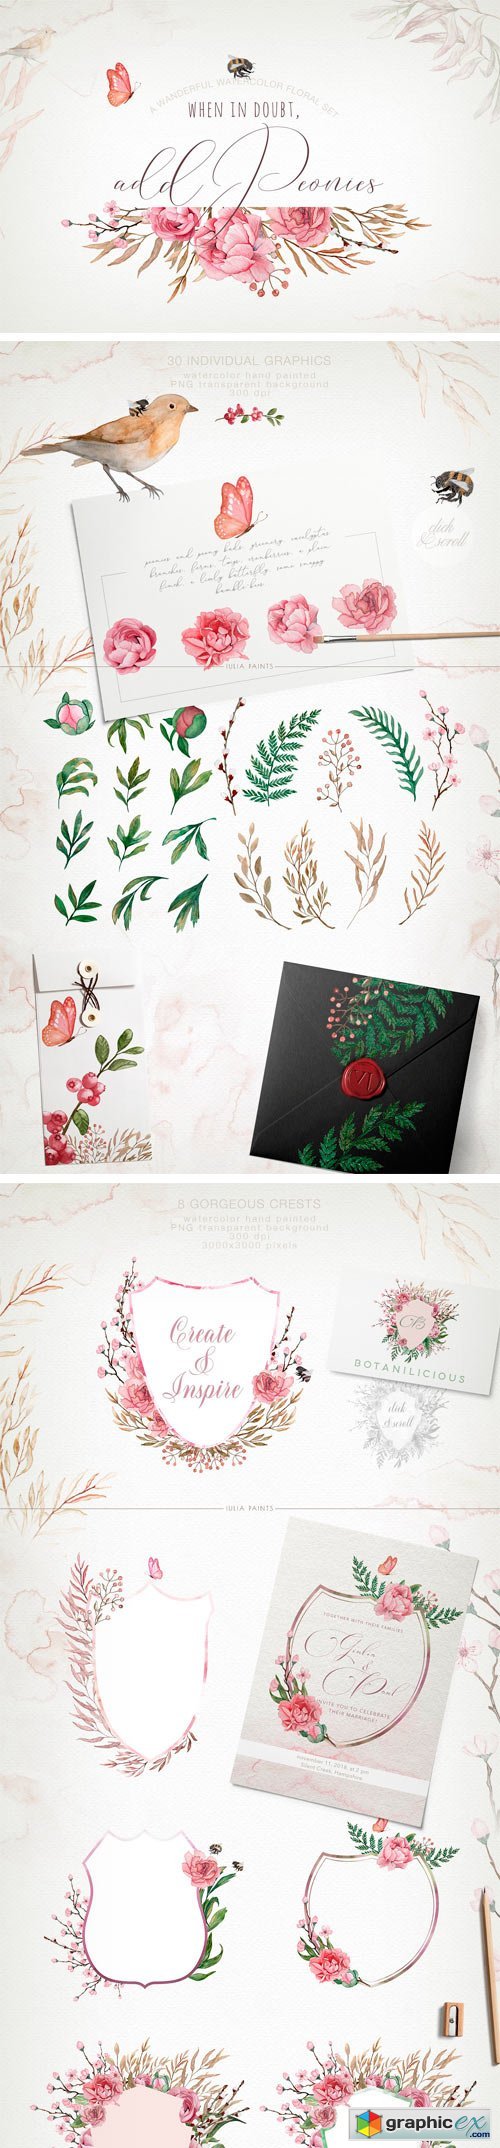 Add Peonies - Watercolor Graphic Set